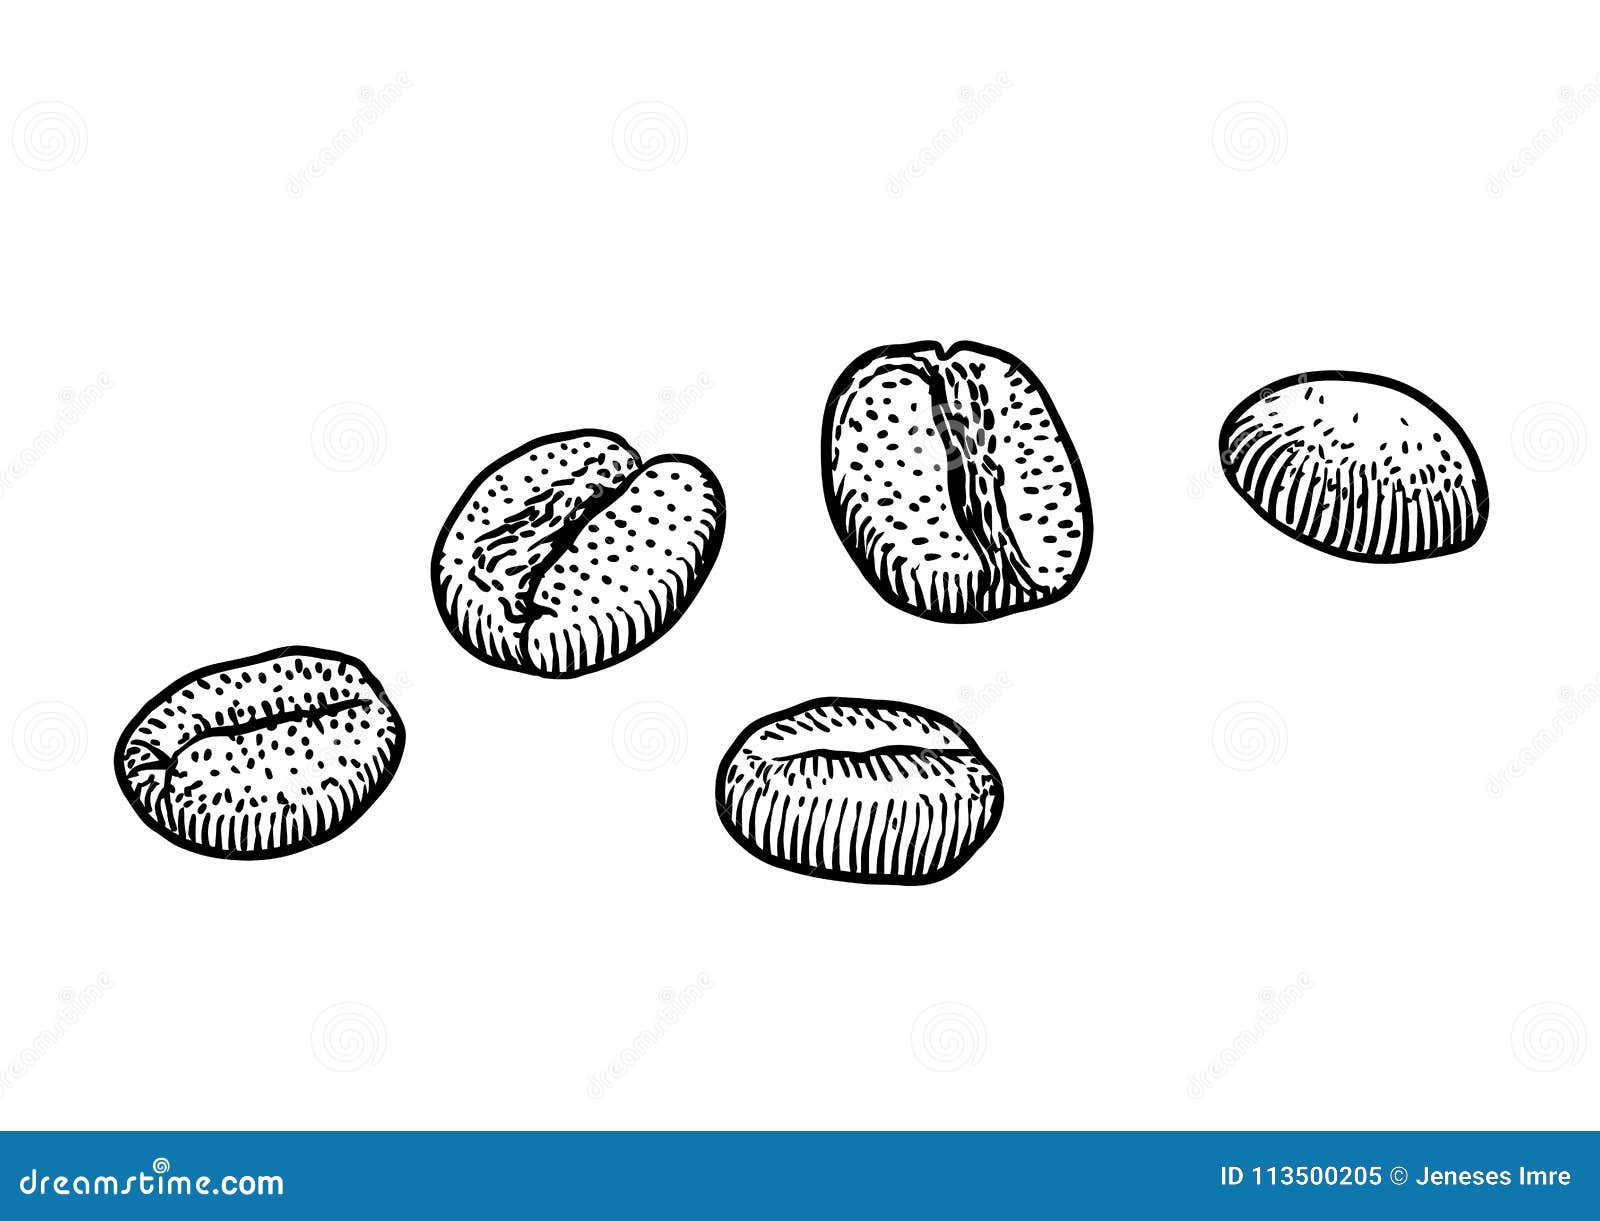 Coffee Bean Illustration, Drawing, Engraving, Ink, Line Art, Vector ...